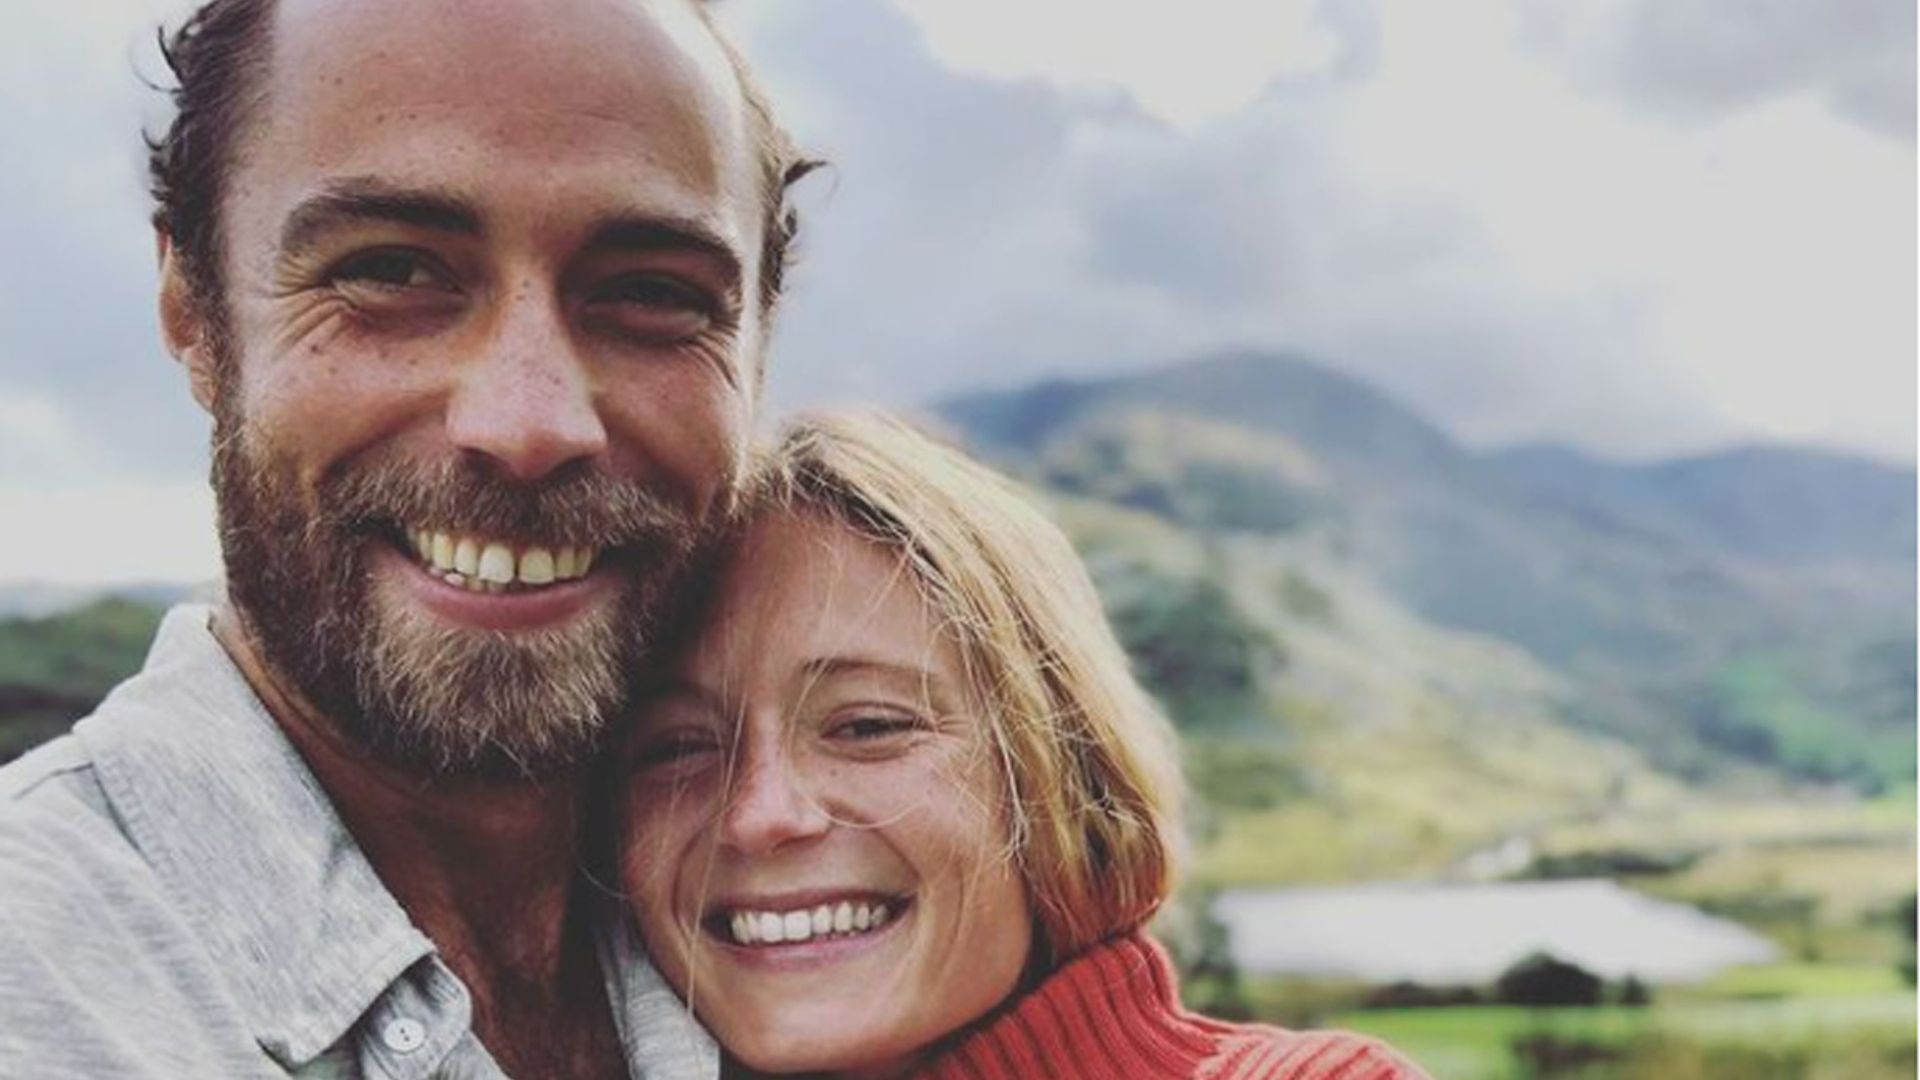 James Middleton celebrates with sweet personal post